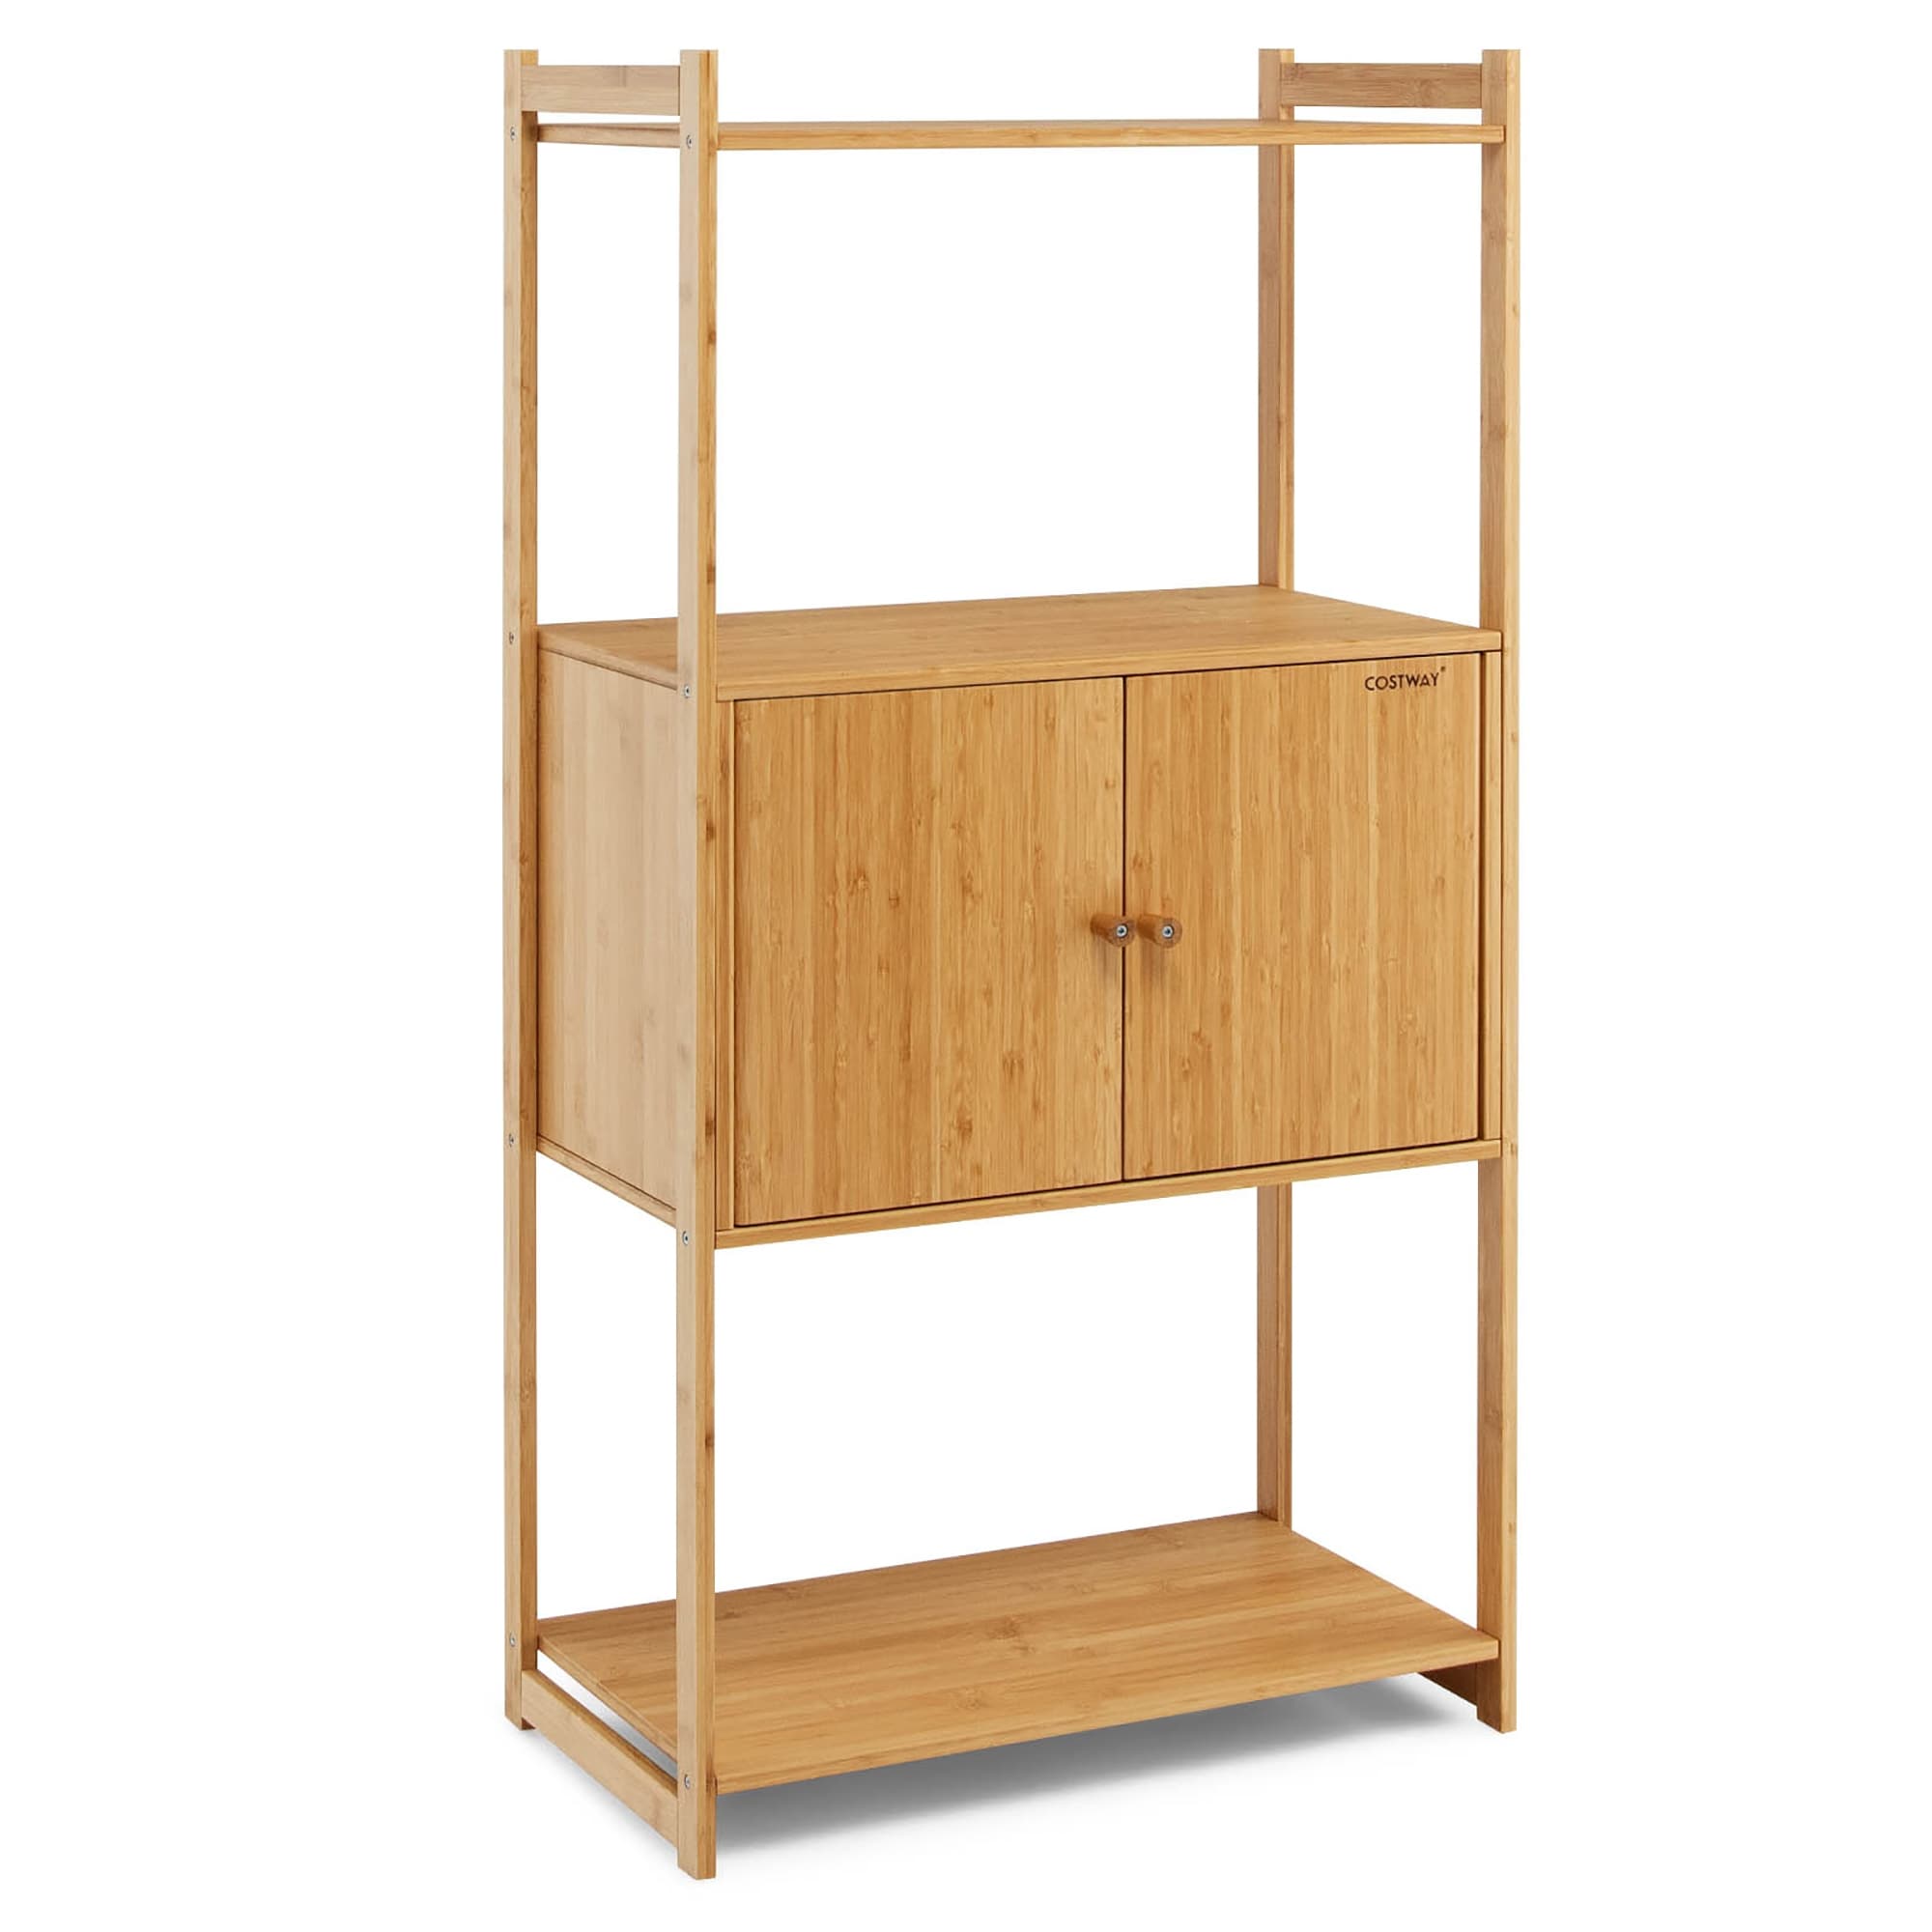 Bamboo Tower Hamper Organizer with 3-Tier Storage Shelves - Costway